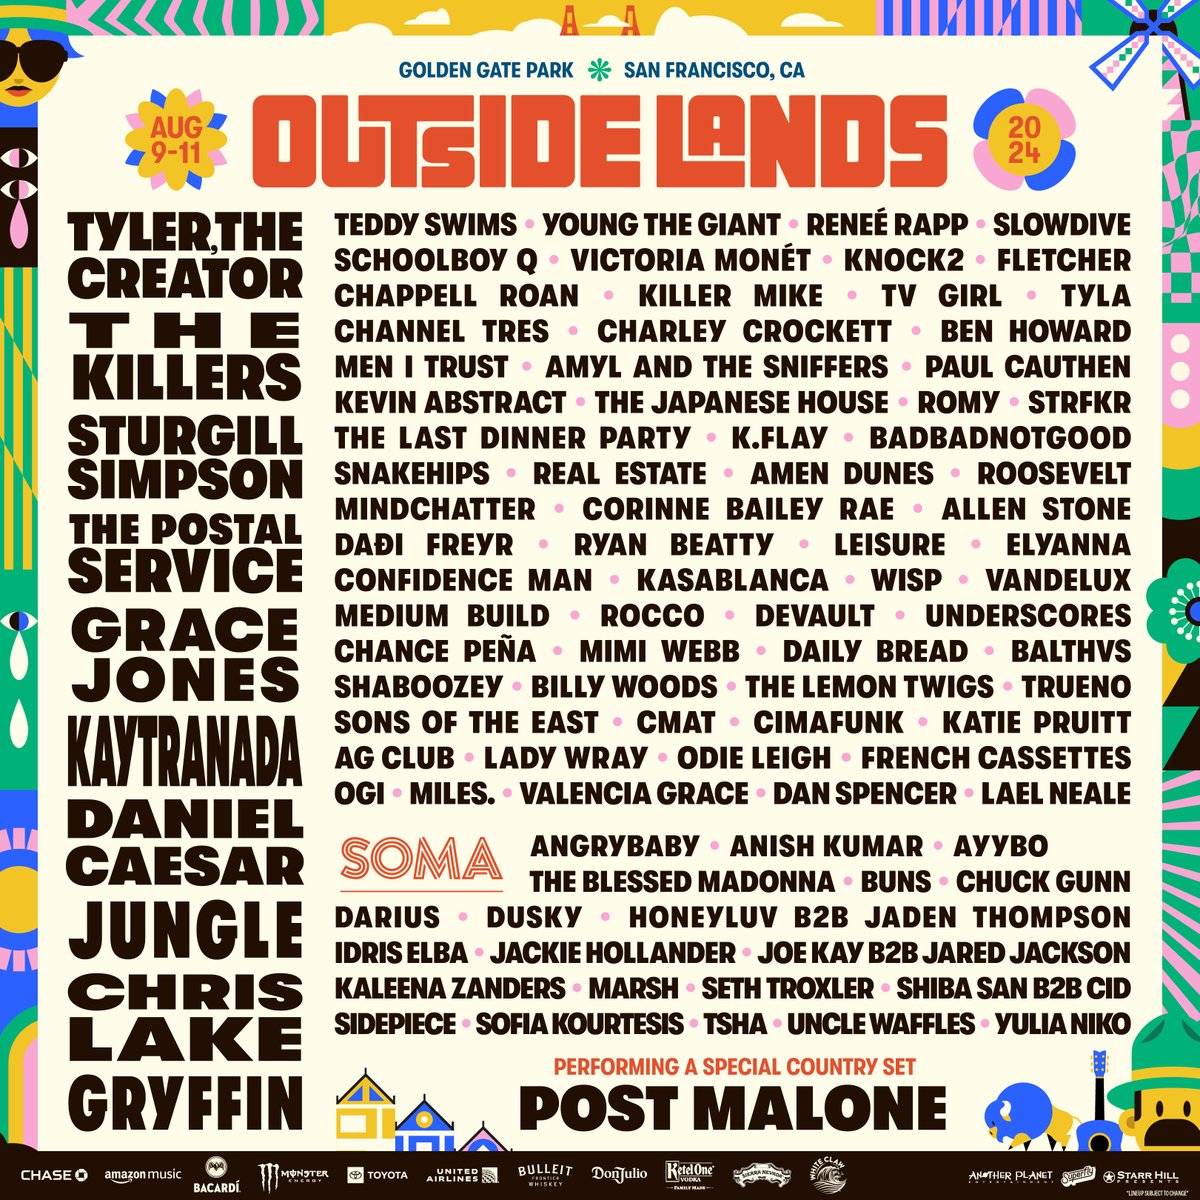 We are thrilled to announce that Daniel Caesar will be joining our lineup! sfoutsidelands.com